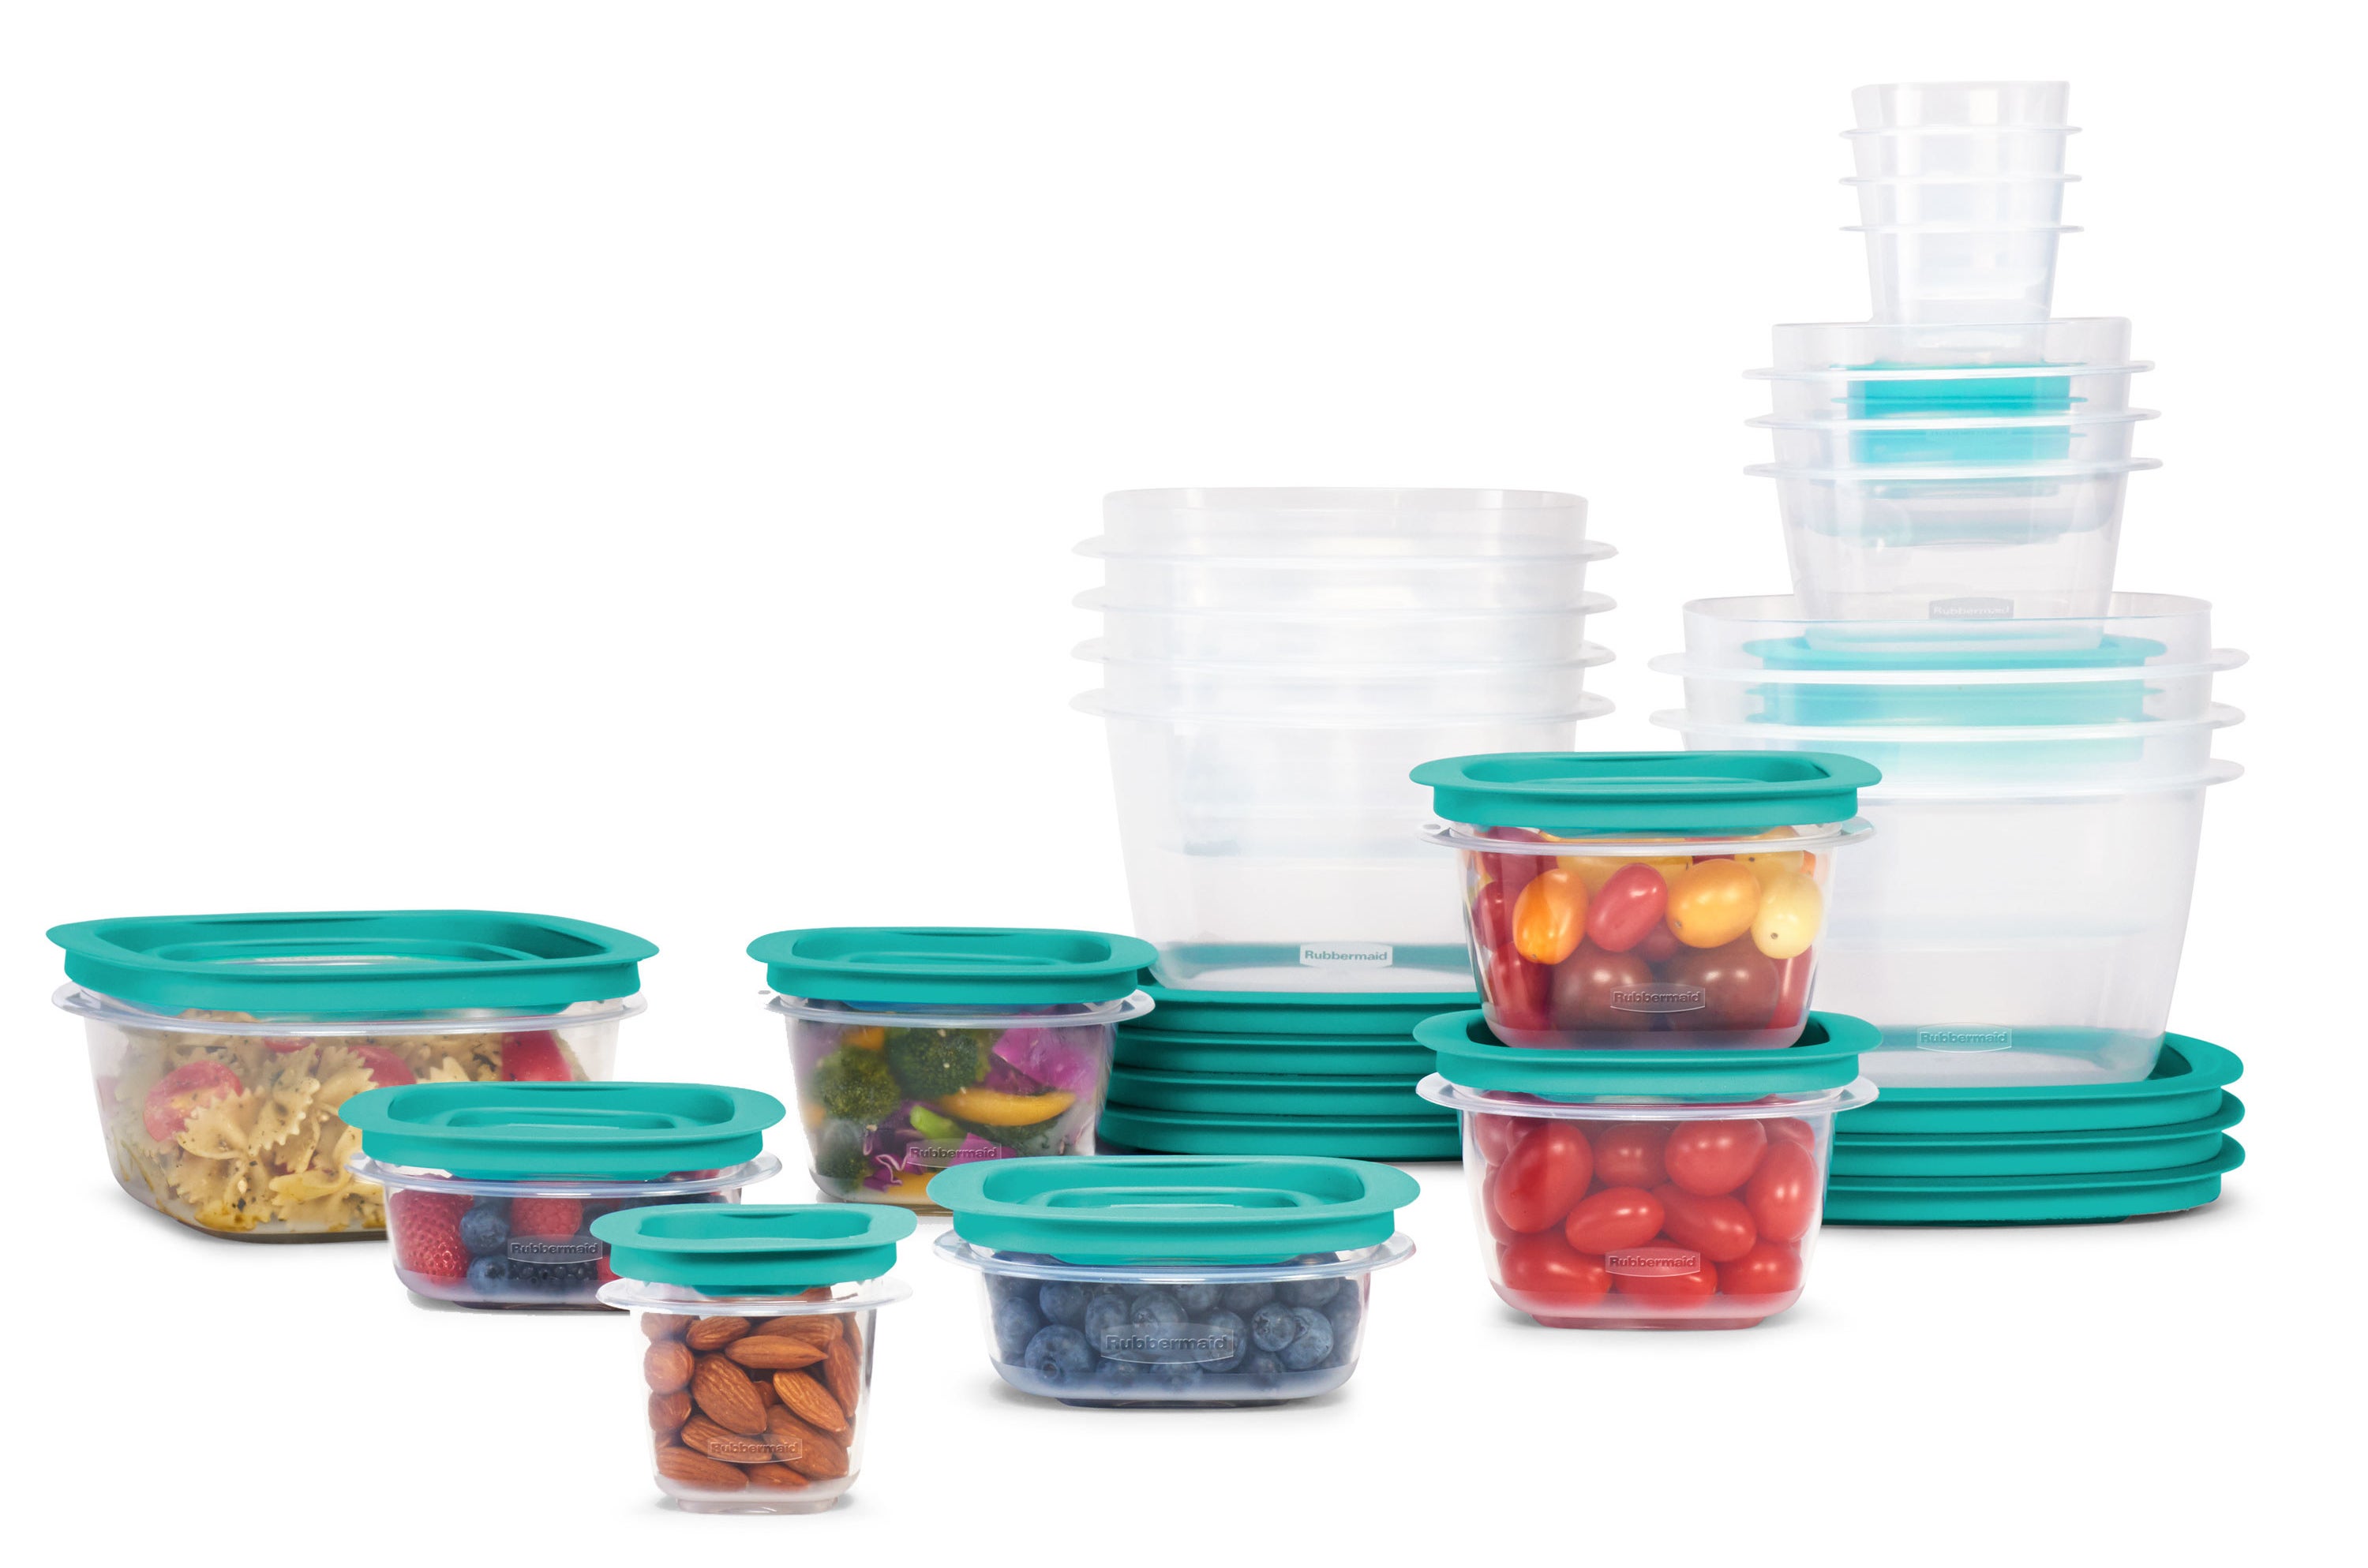 The clear and teal containers full of food